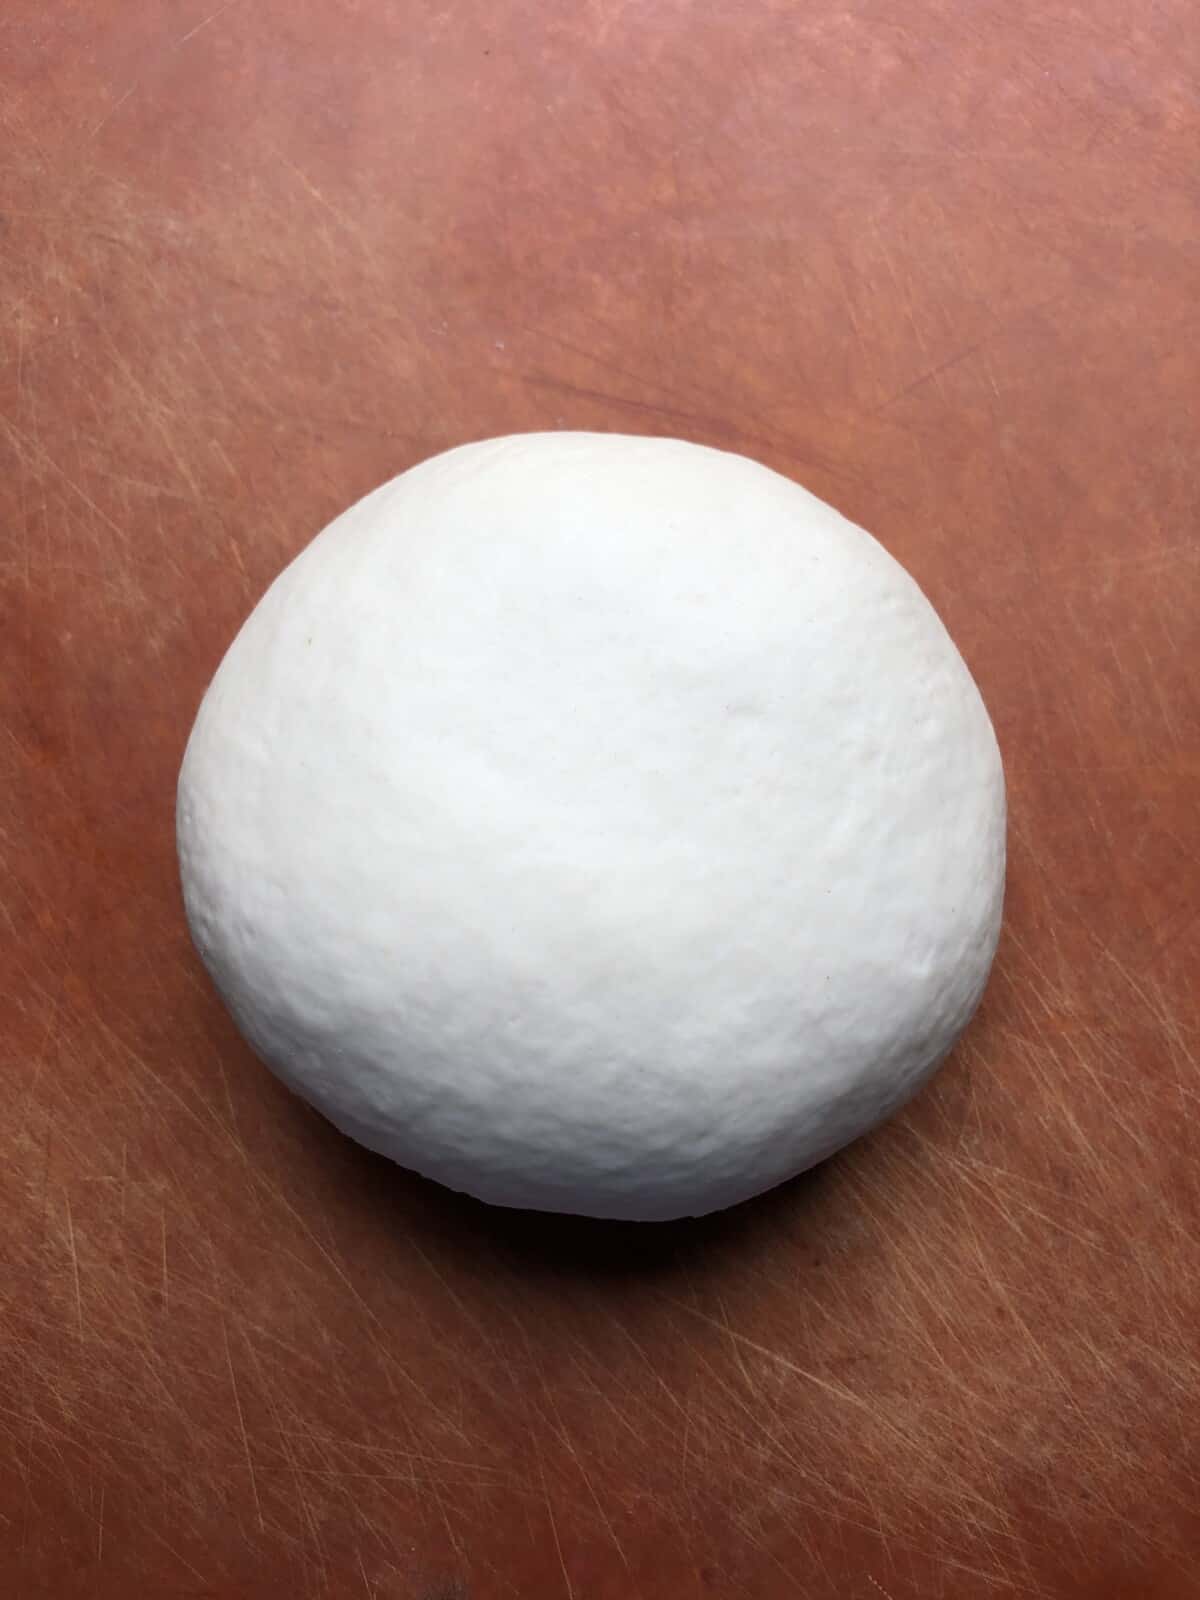 Super smooth and well-hydrated kneaded bread flour pizza dough